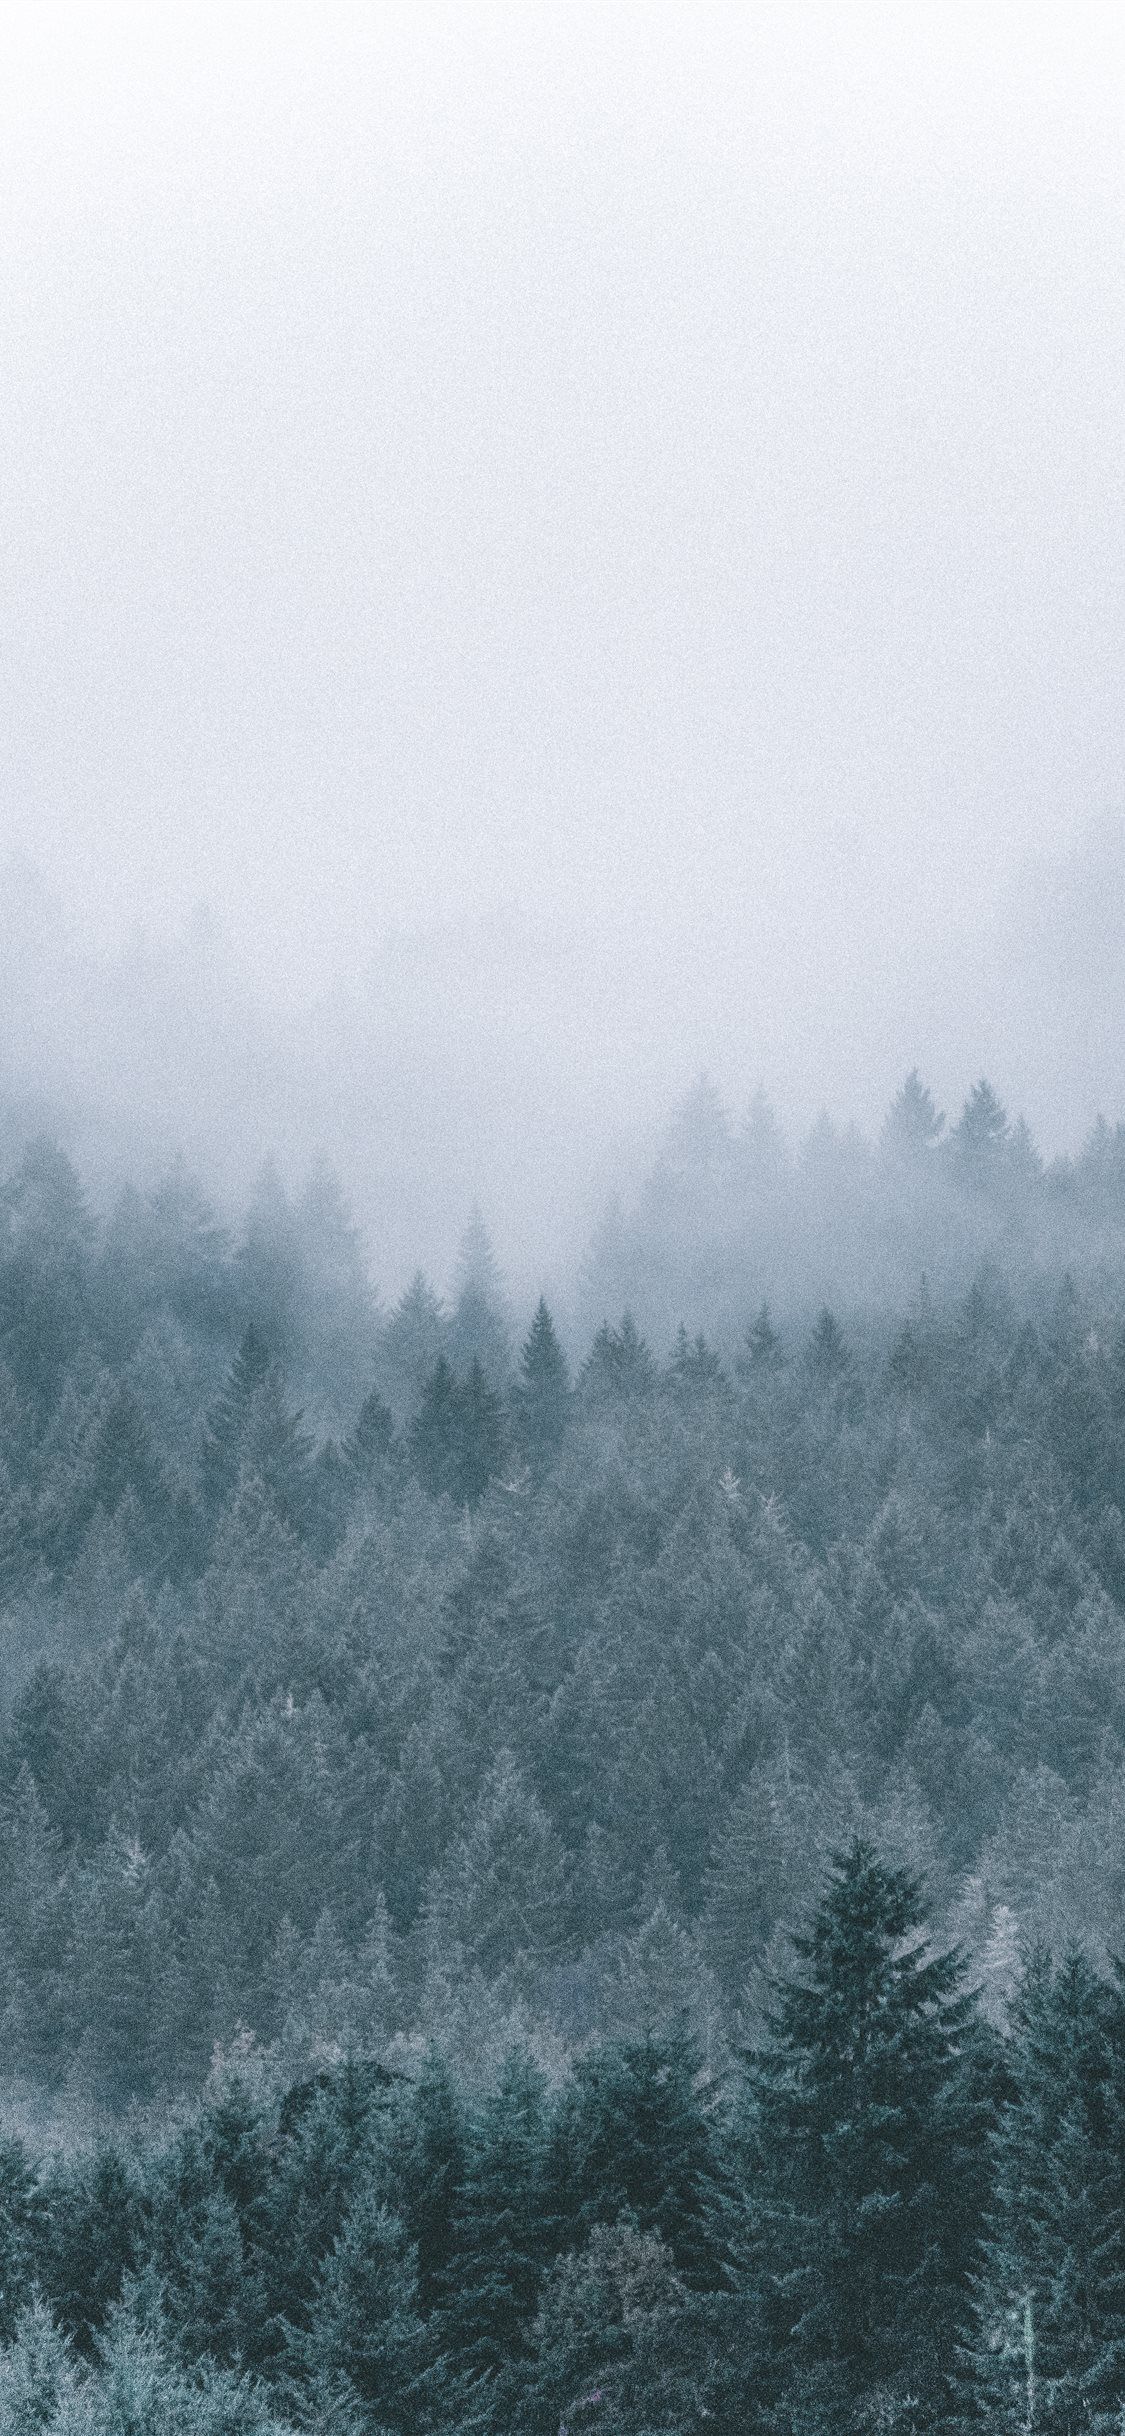 foggy icy green pine trees scenery Wallpaper. Tree scenery wallpaper, Scenery wallpaper, Snow wallpaper iphone